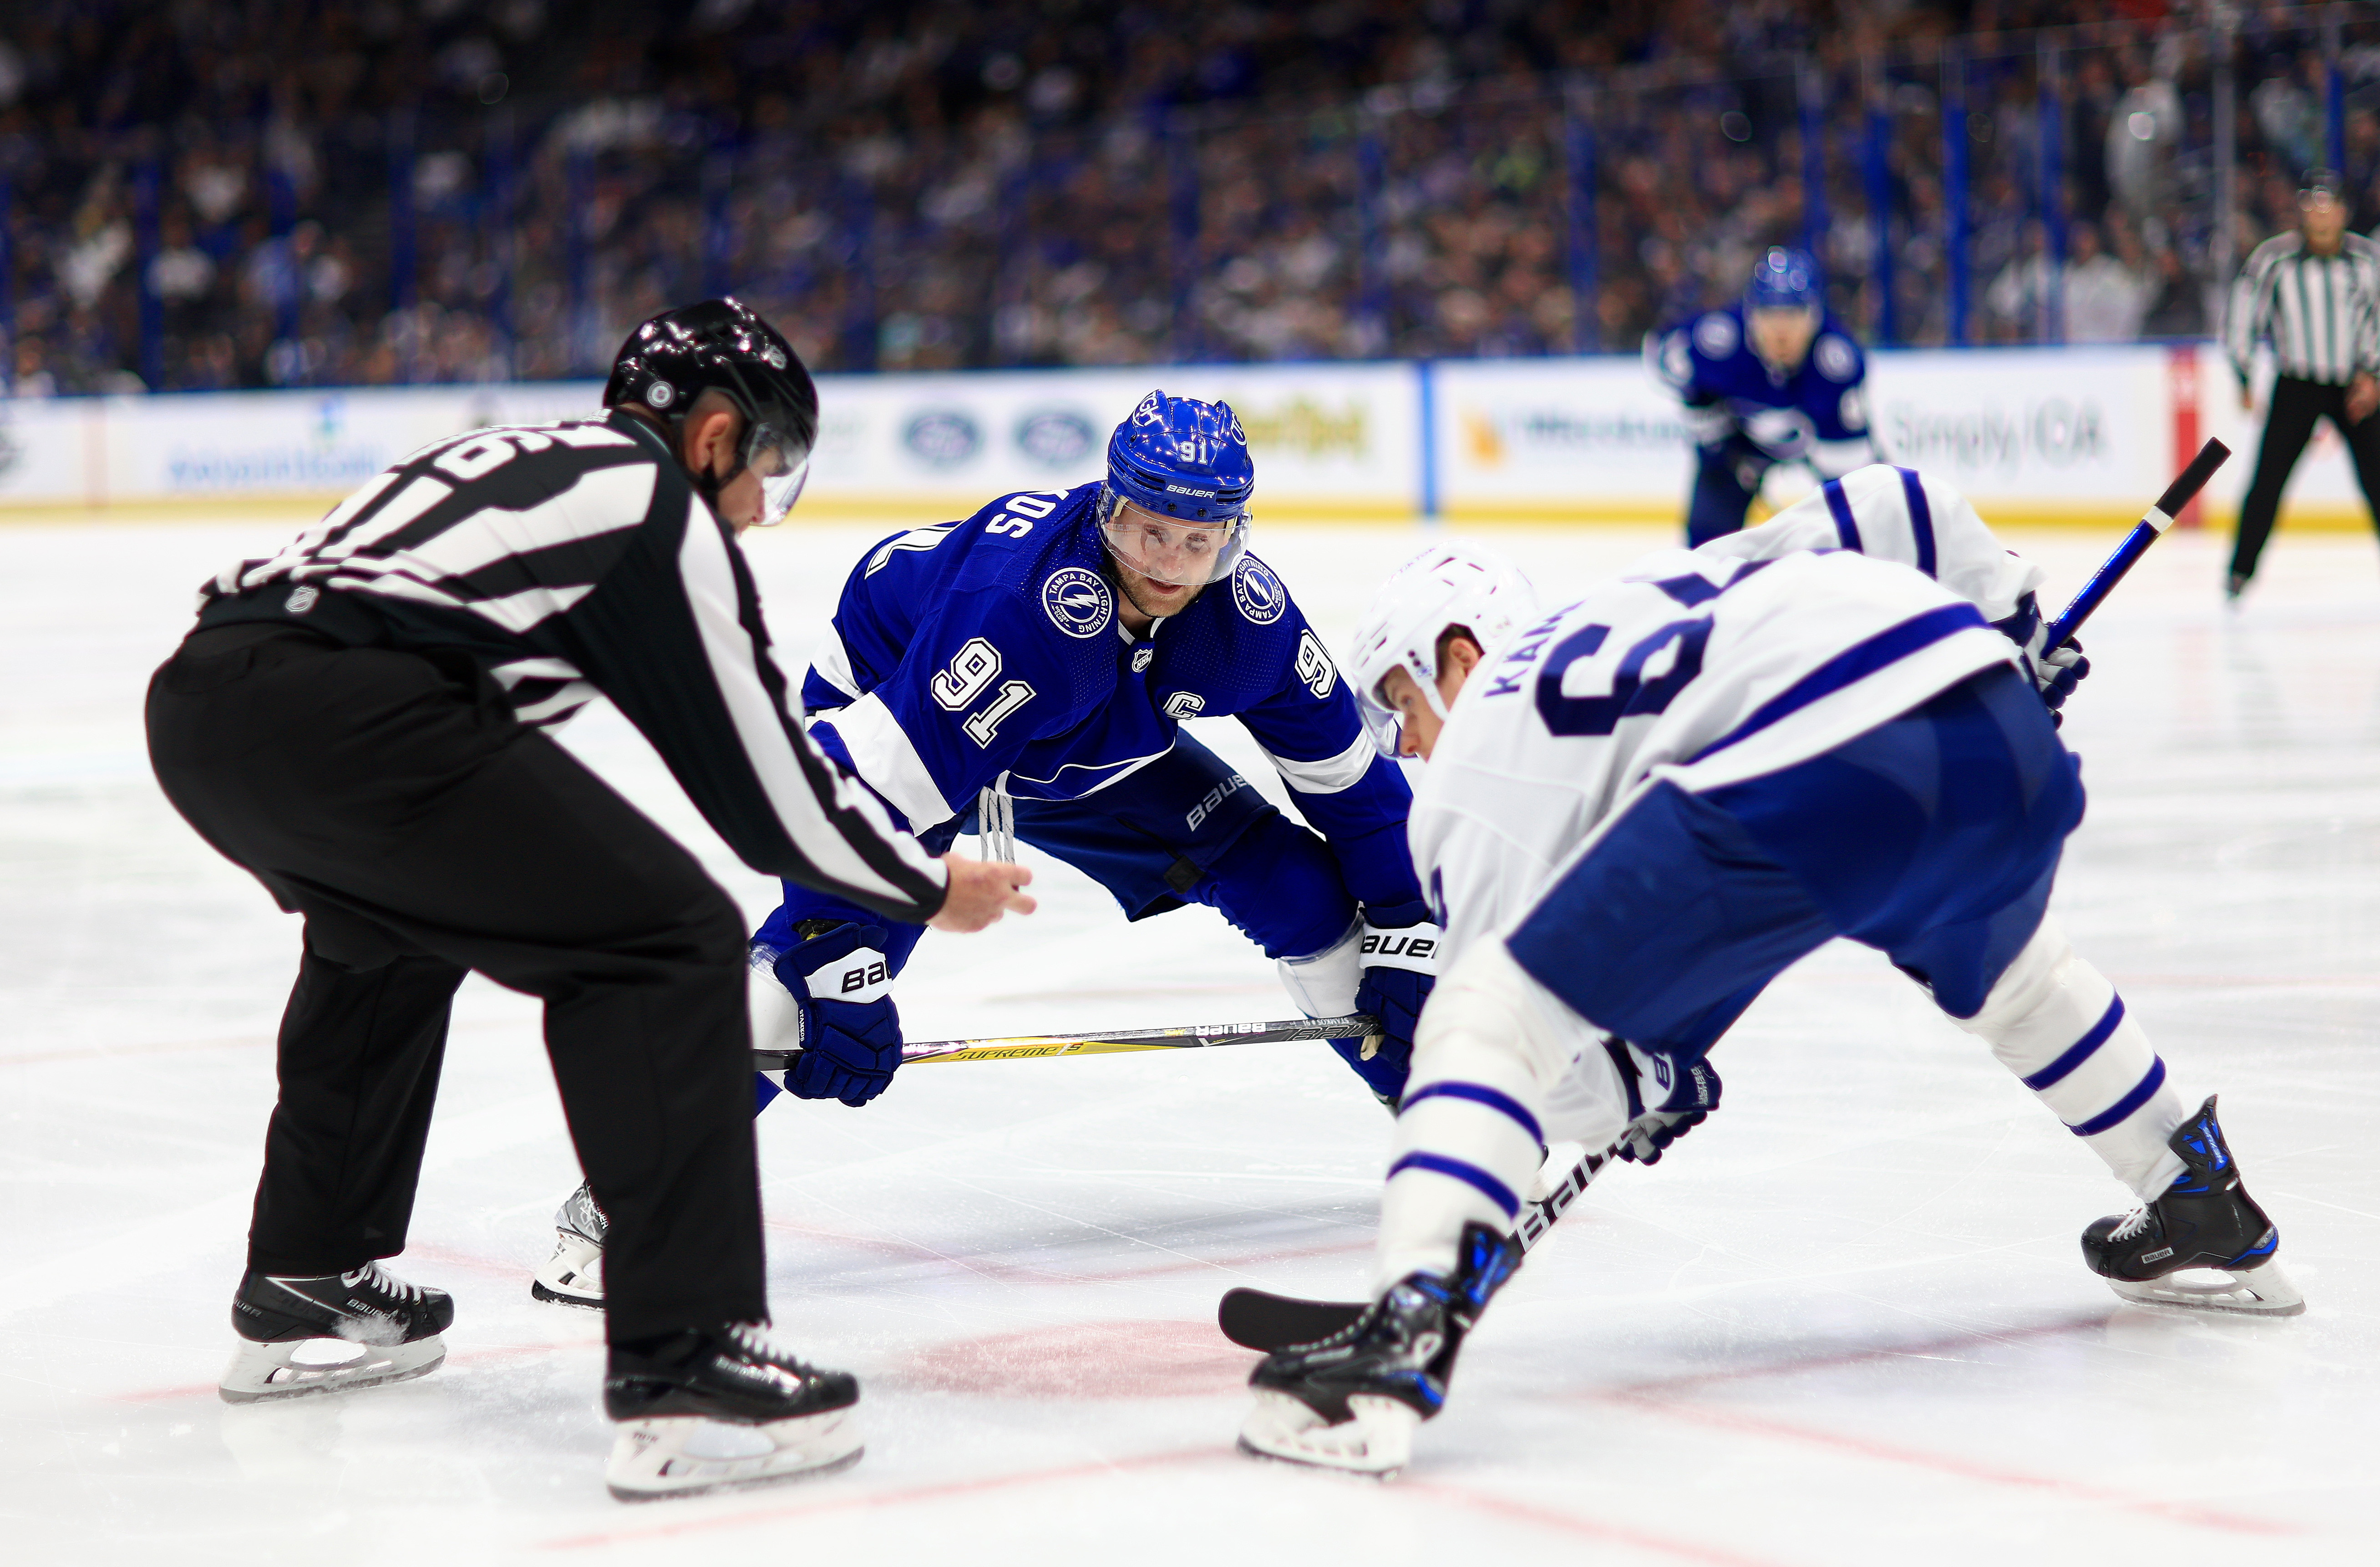 Steven Stamkos #91 of the Tampa Bay Lightning and David Kampf #64 of the Toronto Maple Leafs face off in the second period during a game at Amalie Arena on April 21, 2022 in Tampa, Florida.